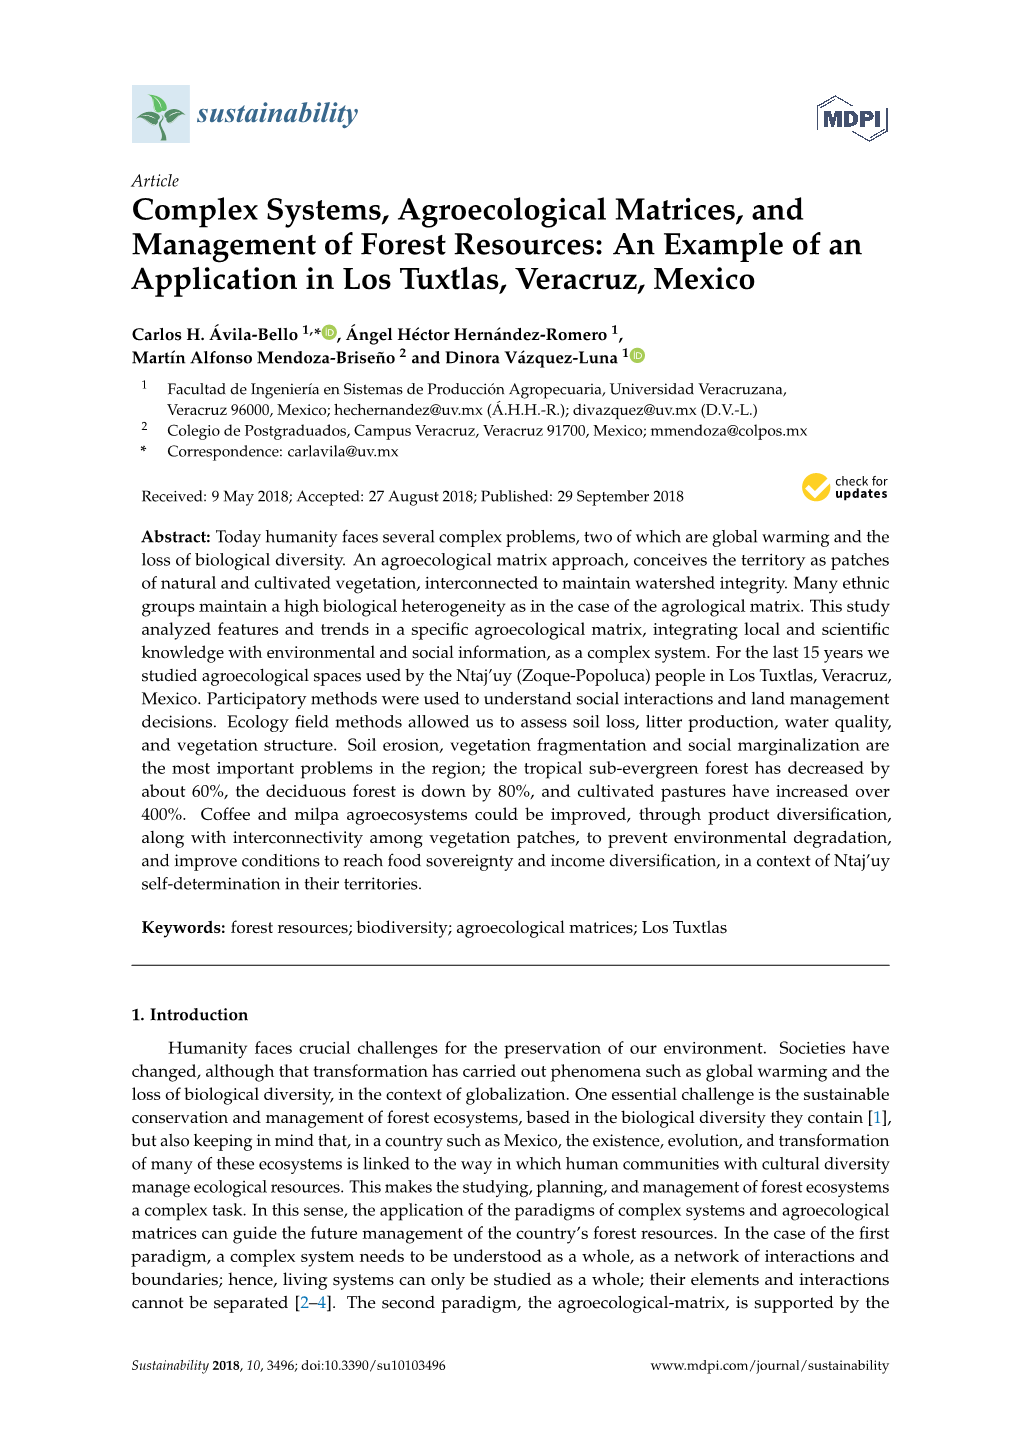 Complex Systems, Agroecological Matrices, and Management of Forest Resources: an Example of an Application in Los Tuxtlas, Veracruz, Mexico